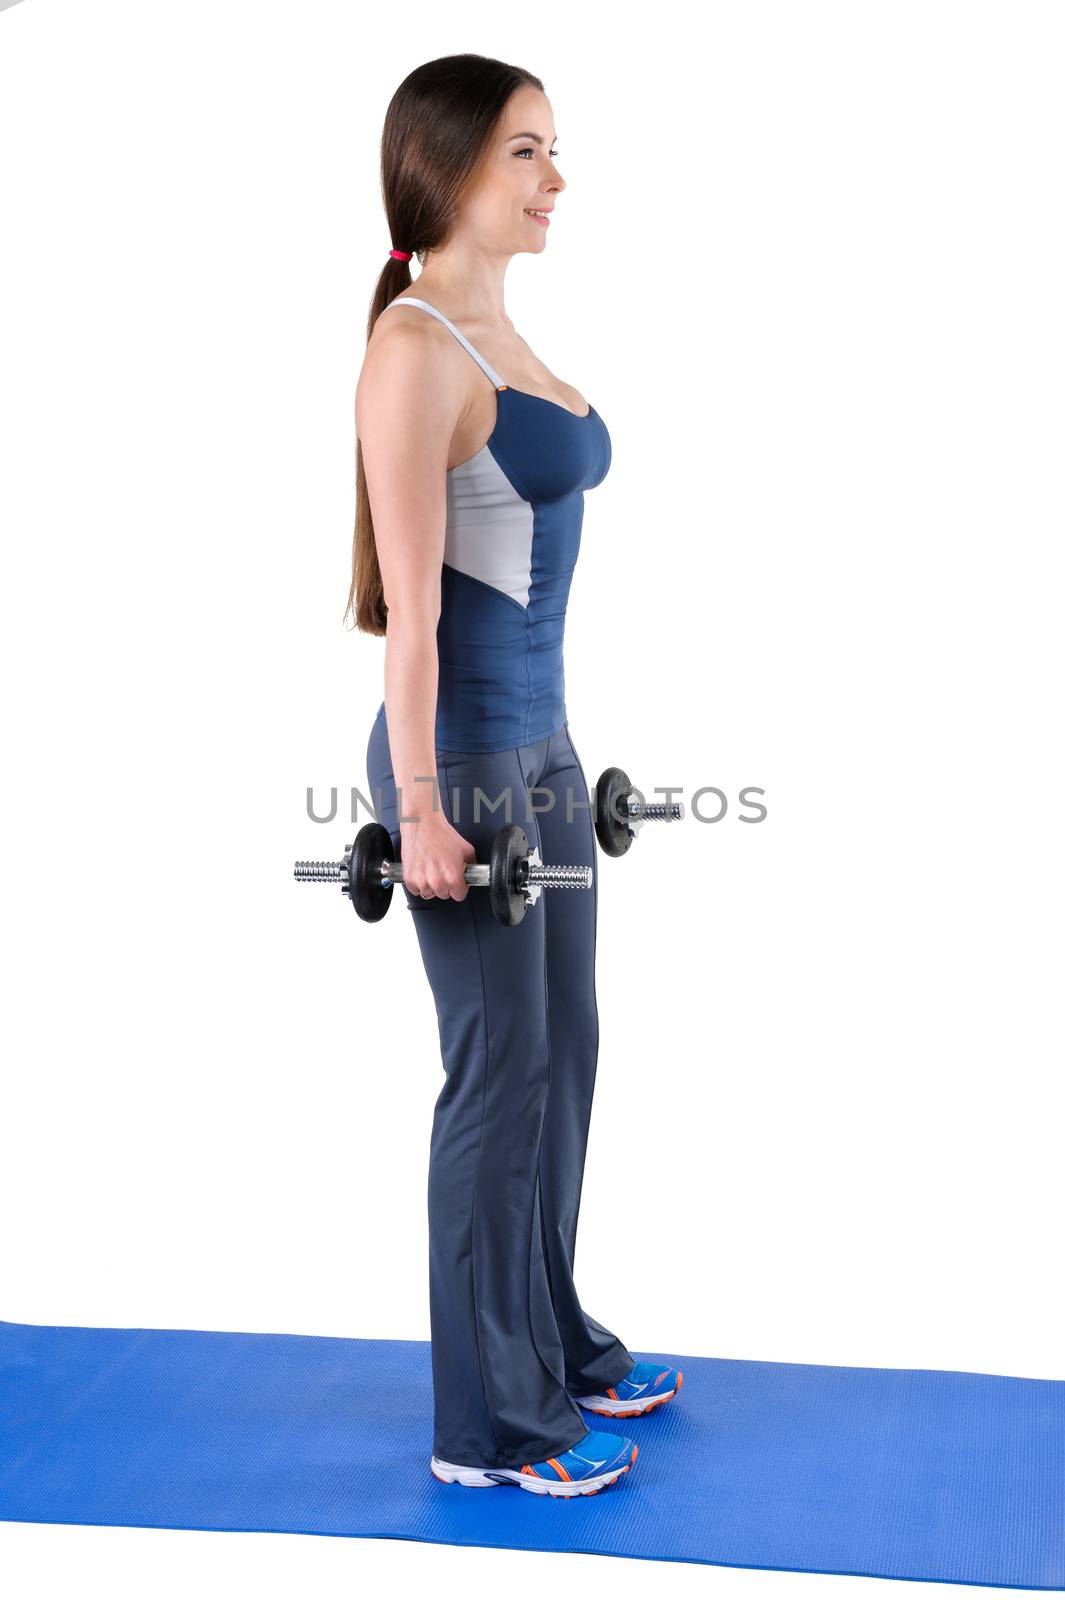 Young woman shows starting position of Standing Dumbbell Squats workout, isolated on white